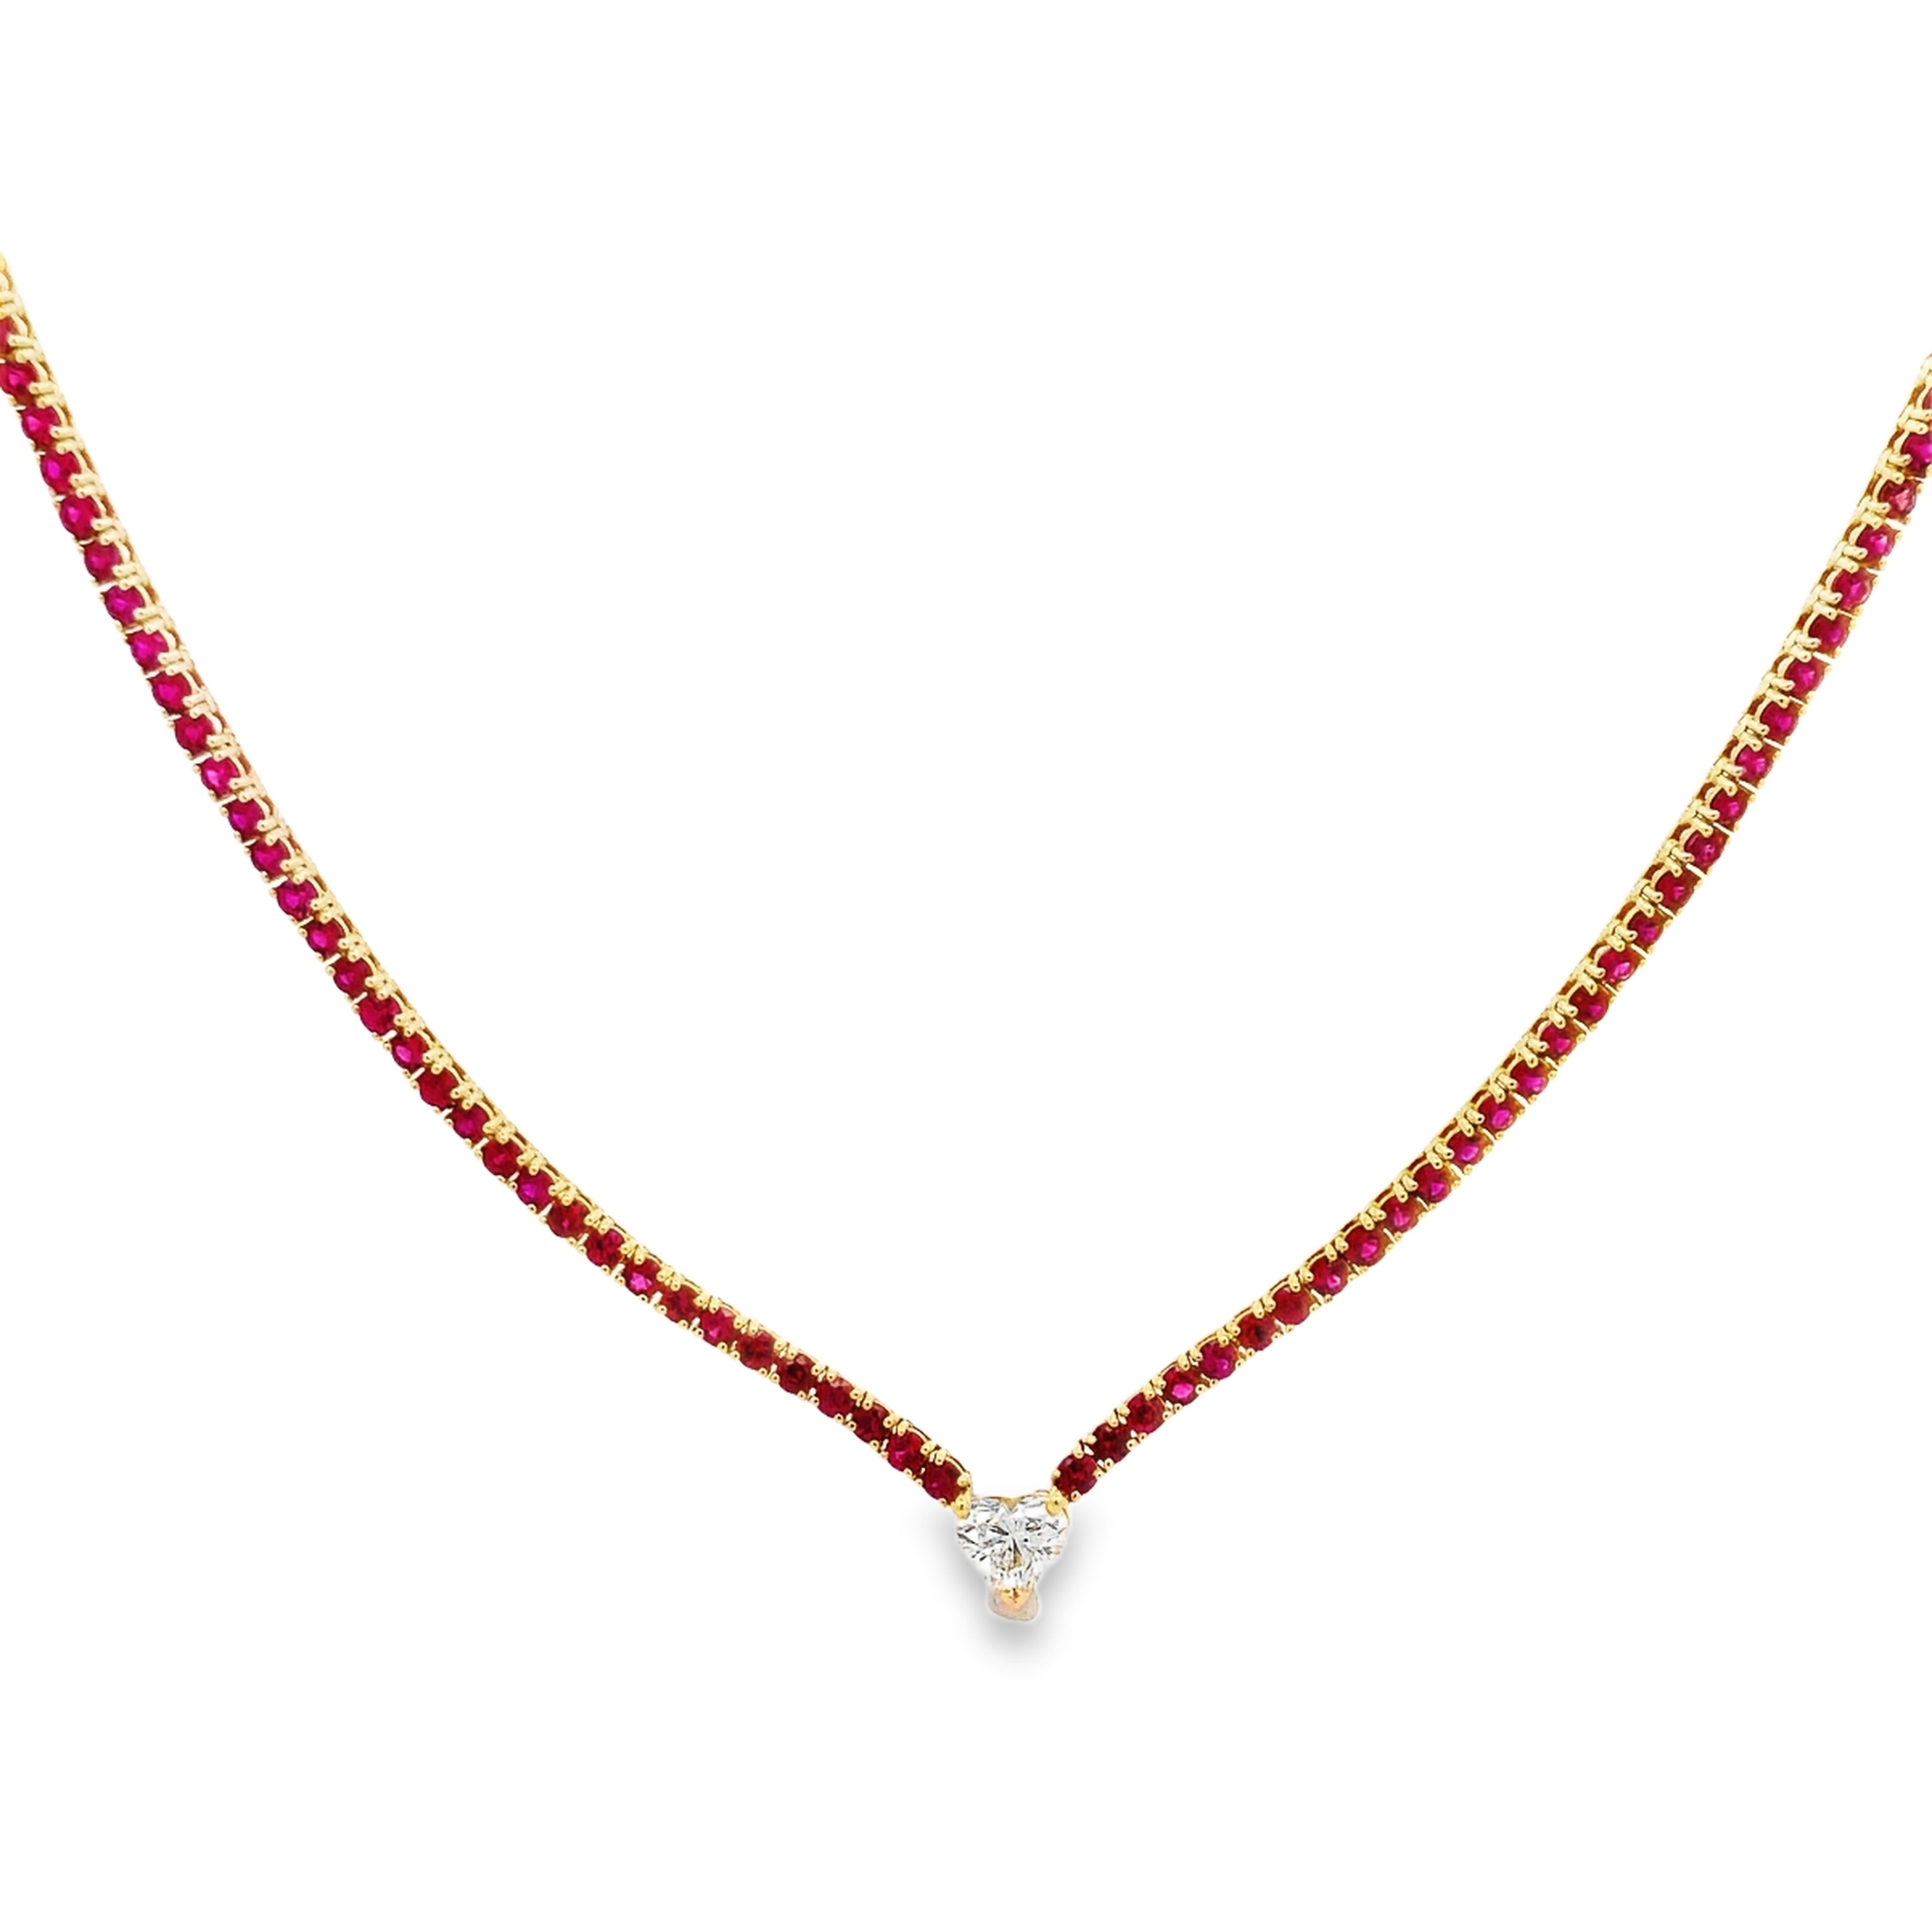 Norman Silverman 18K Yellow Gold Ruby and Diamond Accent Tennis Necklace